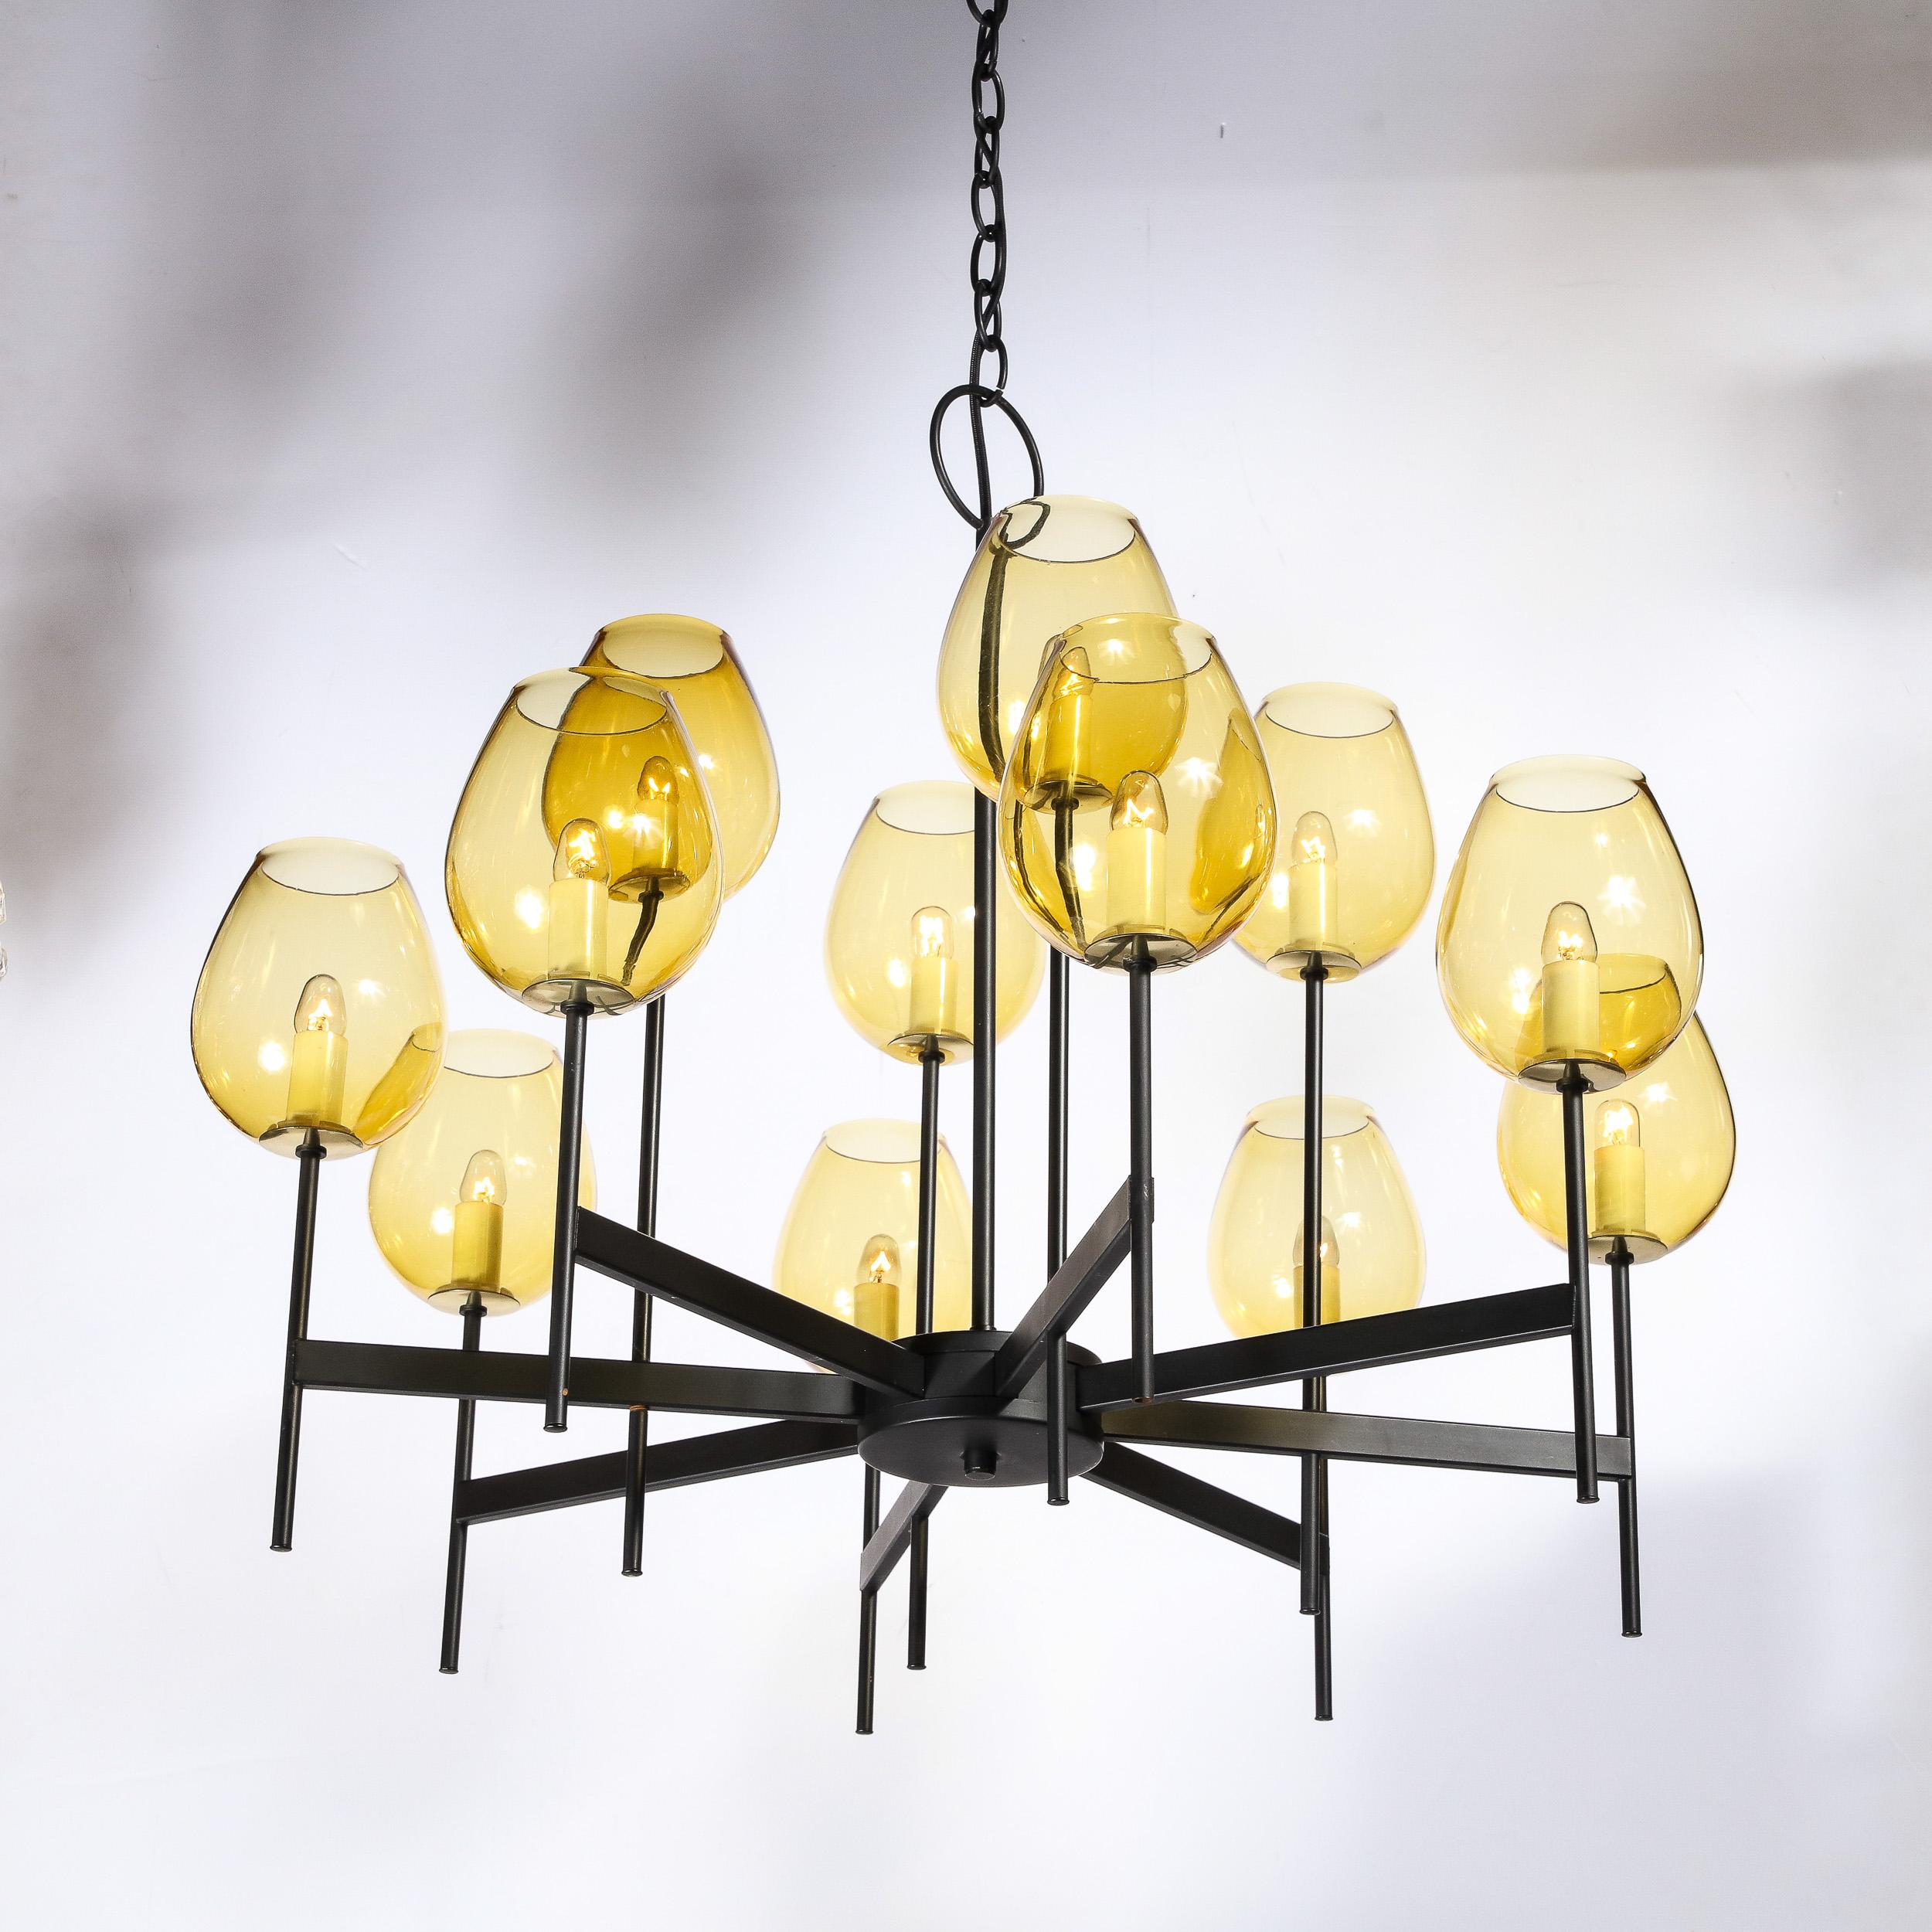 American Mid-Century Modernist Eight Arm Smoked Citrine Glass Chandelier by Lightolier For Sale